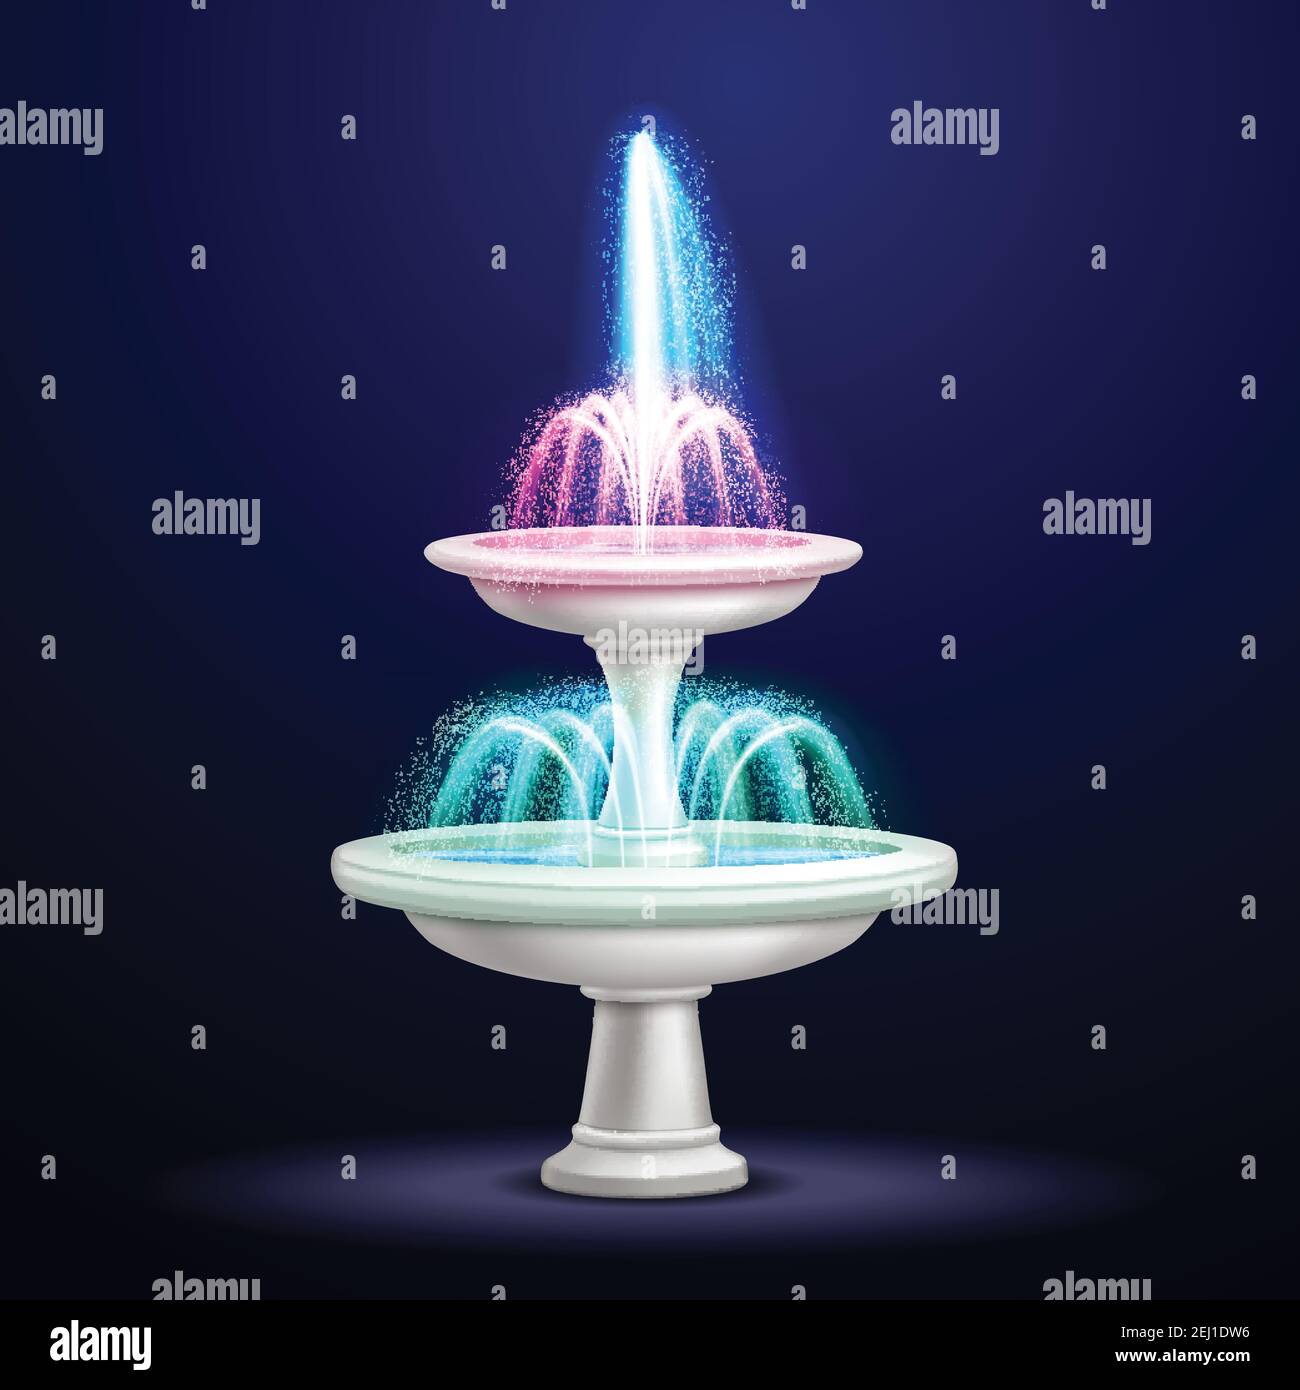 Outdoor water cascade fountain with neon lighting at night realistic closeup image isolated object vector illustration Stock Vector